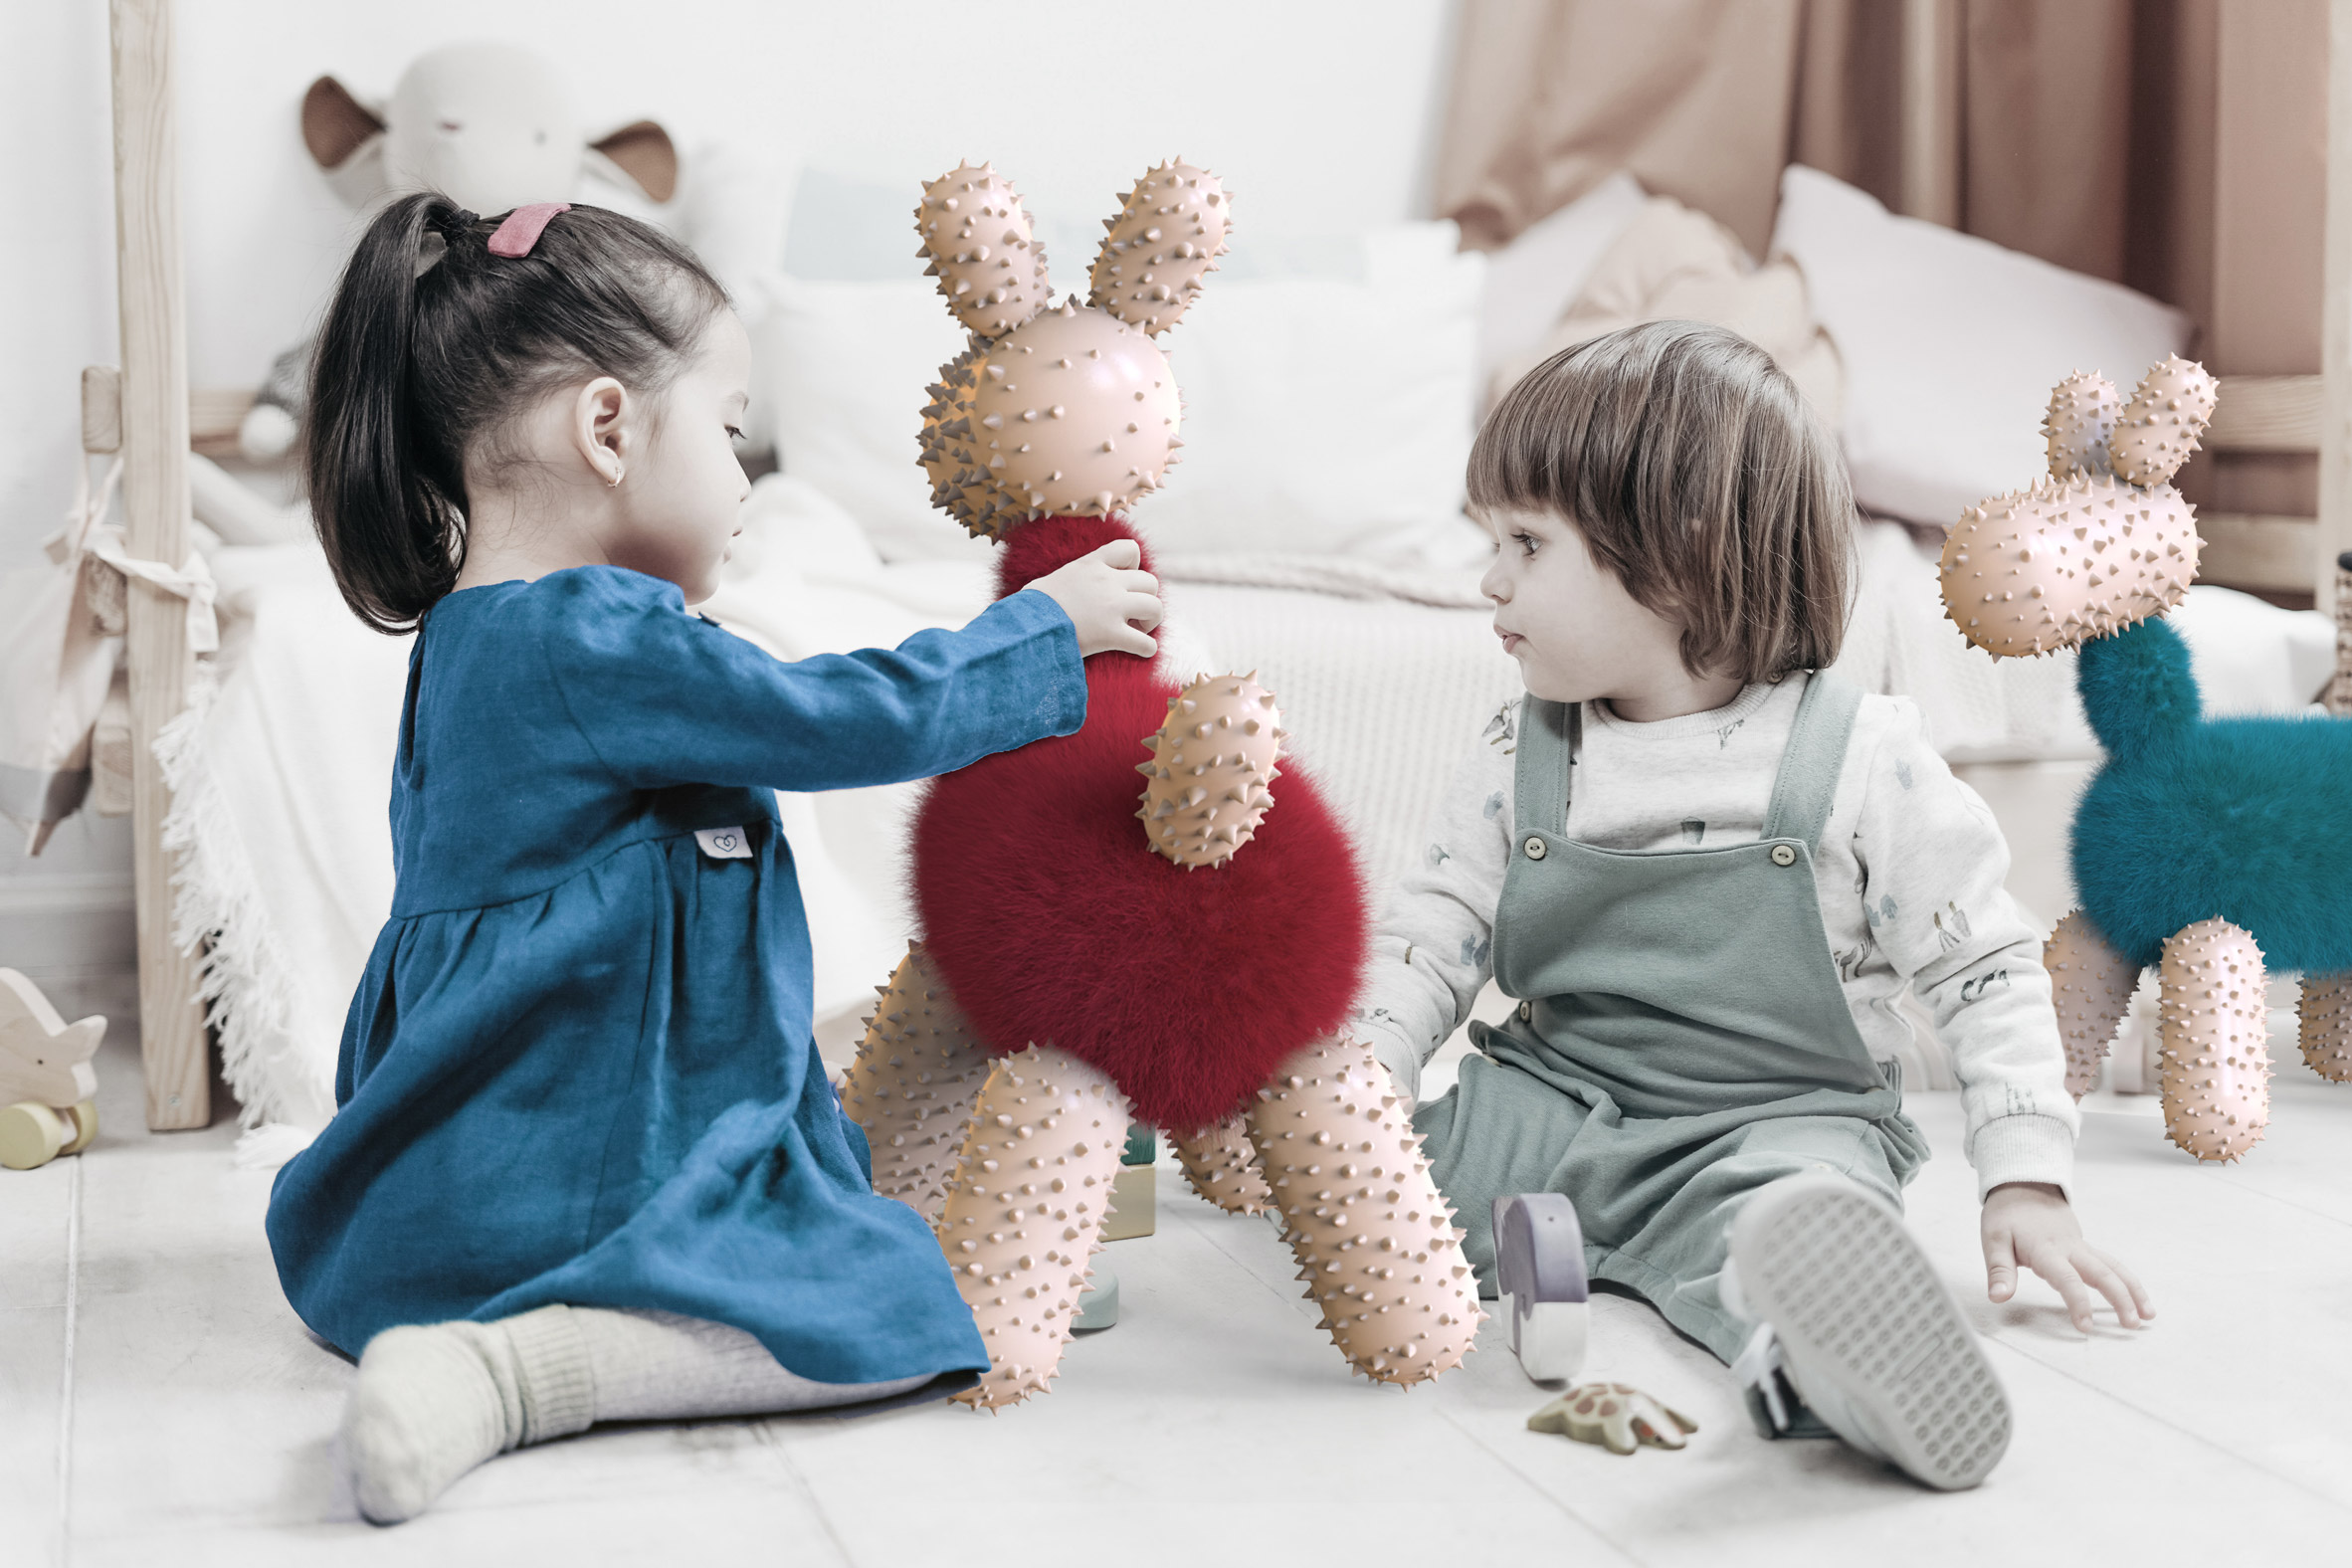 Two children interacting with a dog-shaped toy